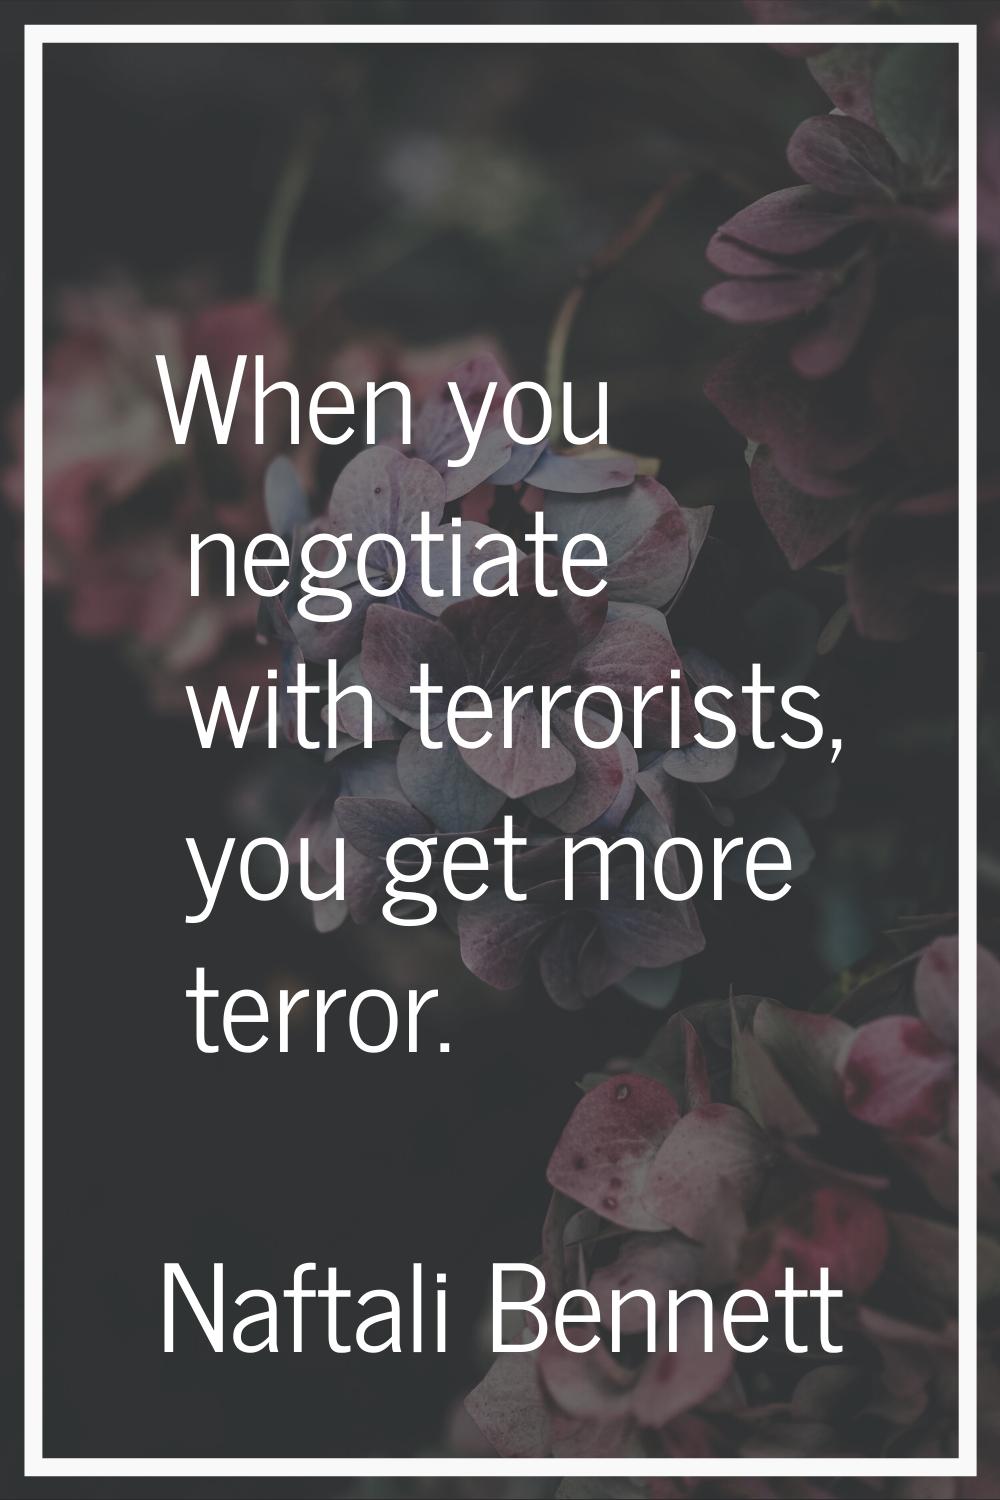 When you negotiate with terrorists, you get more terror.